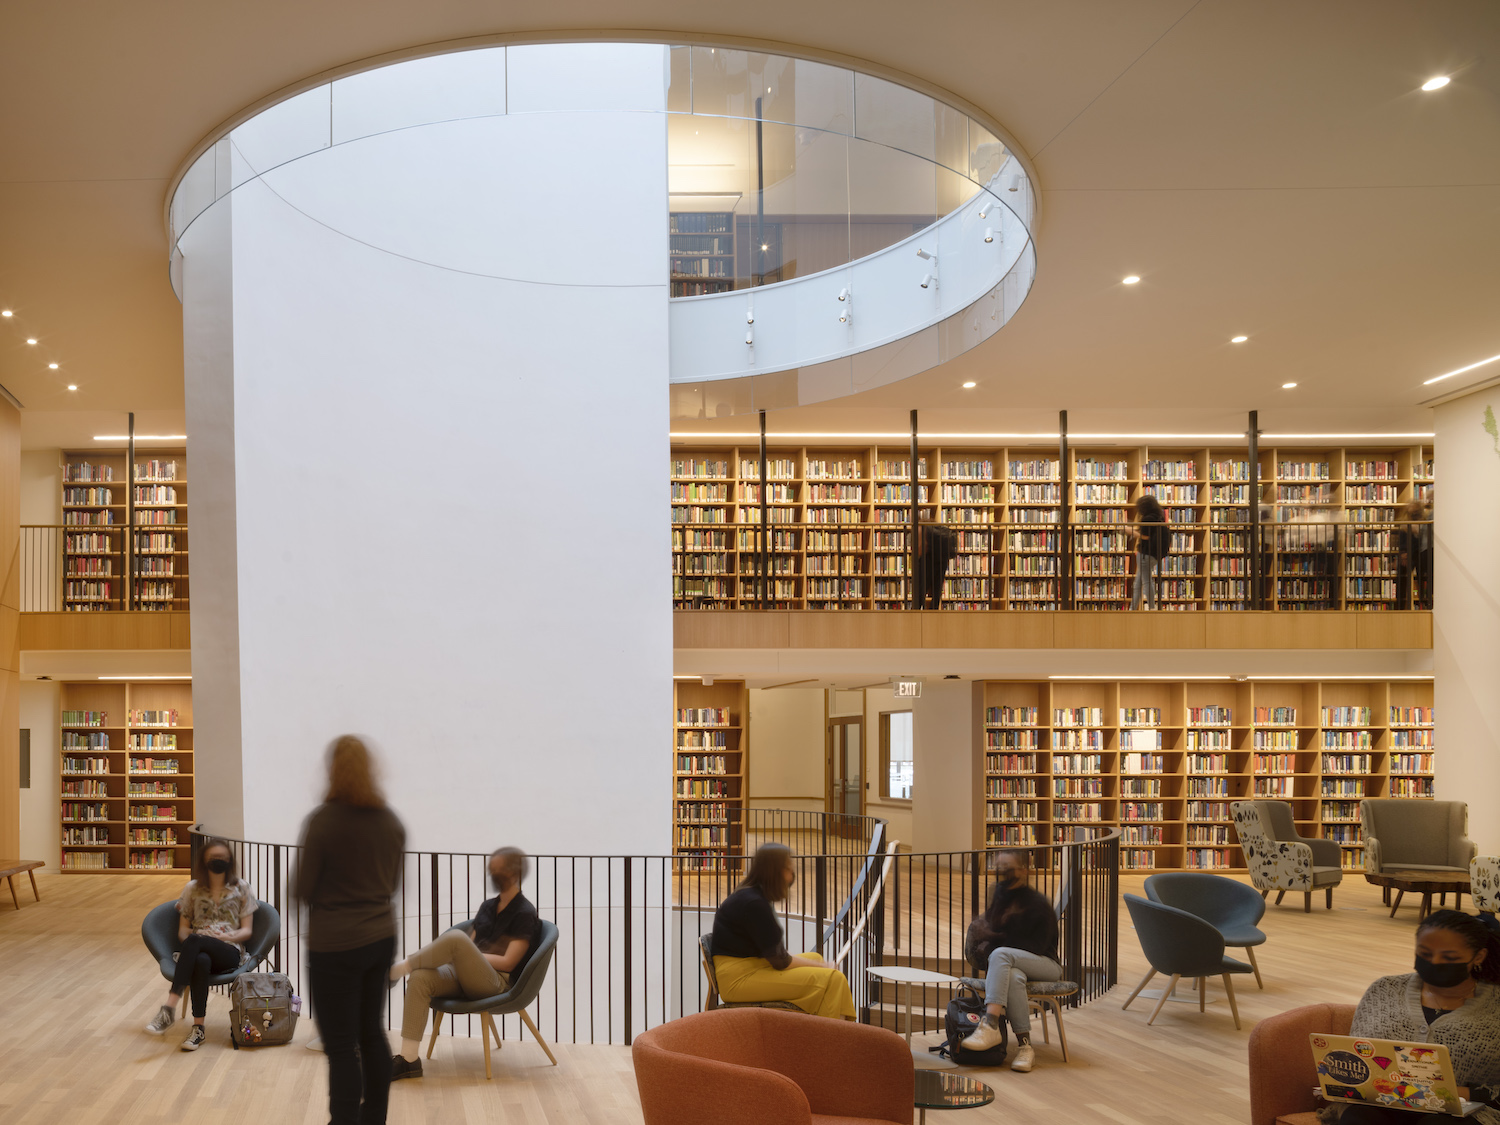 Neilson Library interior—students studying in book lined space under round oculus skylight